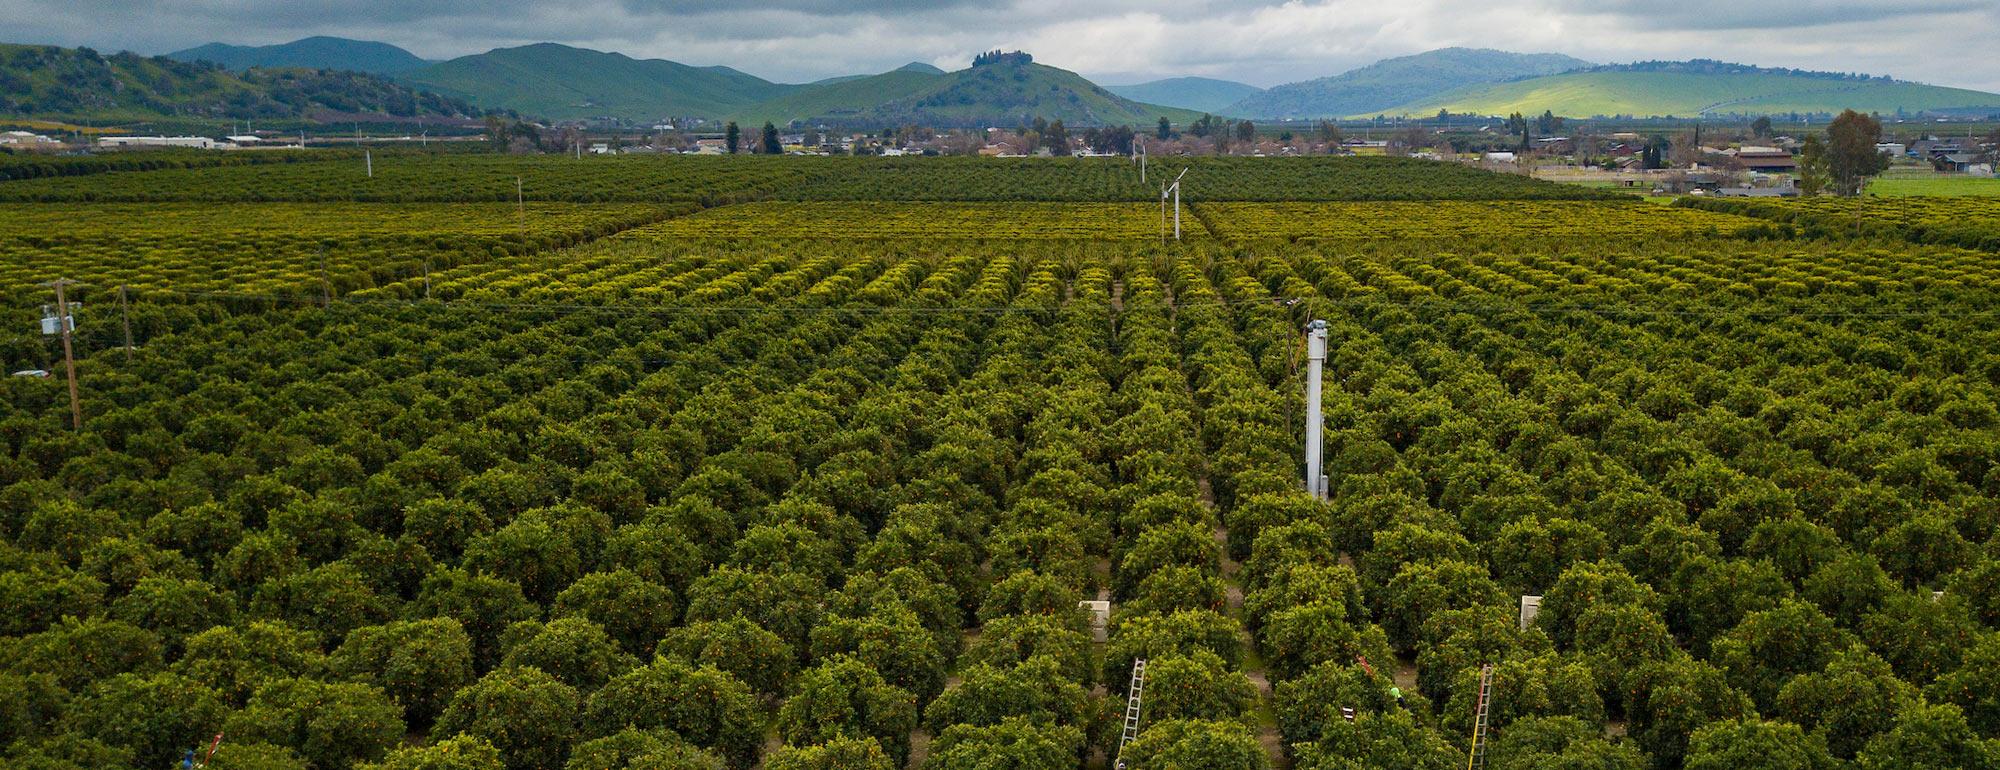 An aerial view of a citrus orchard